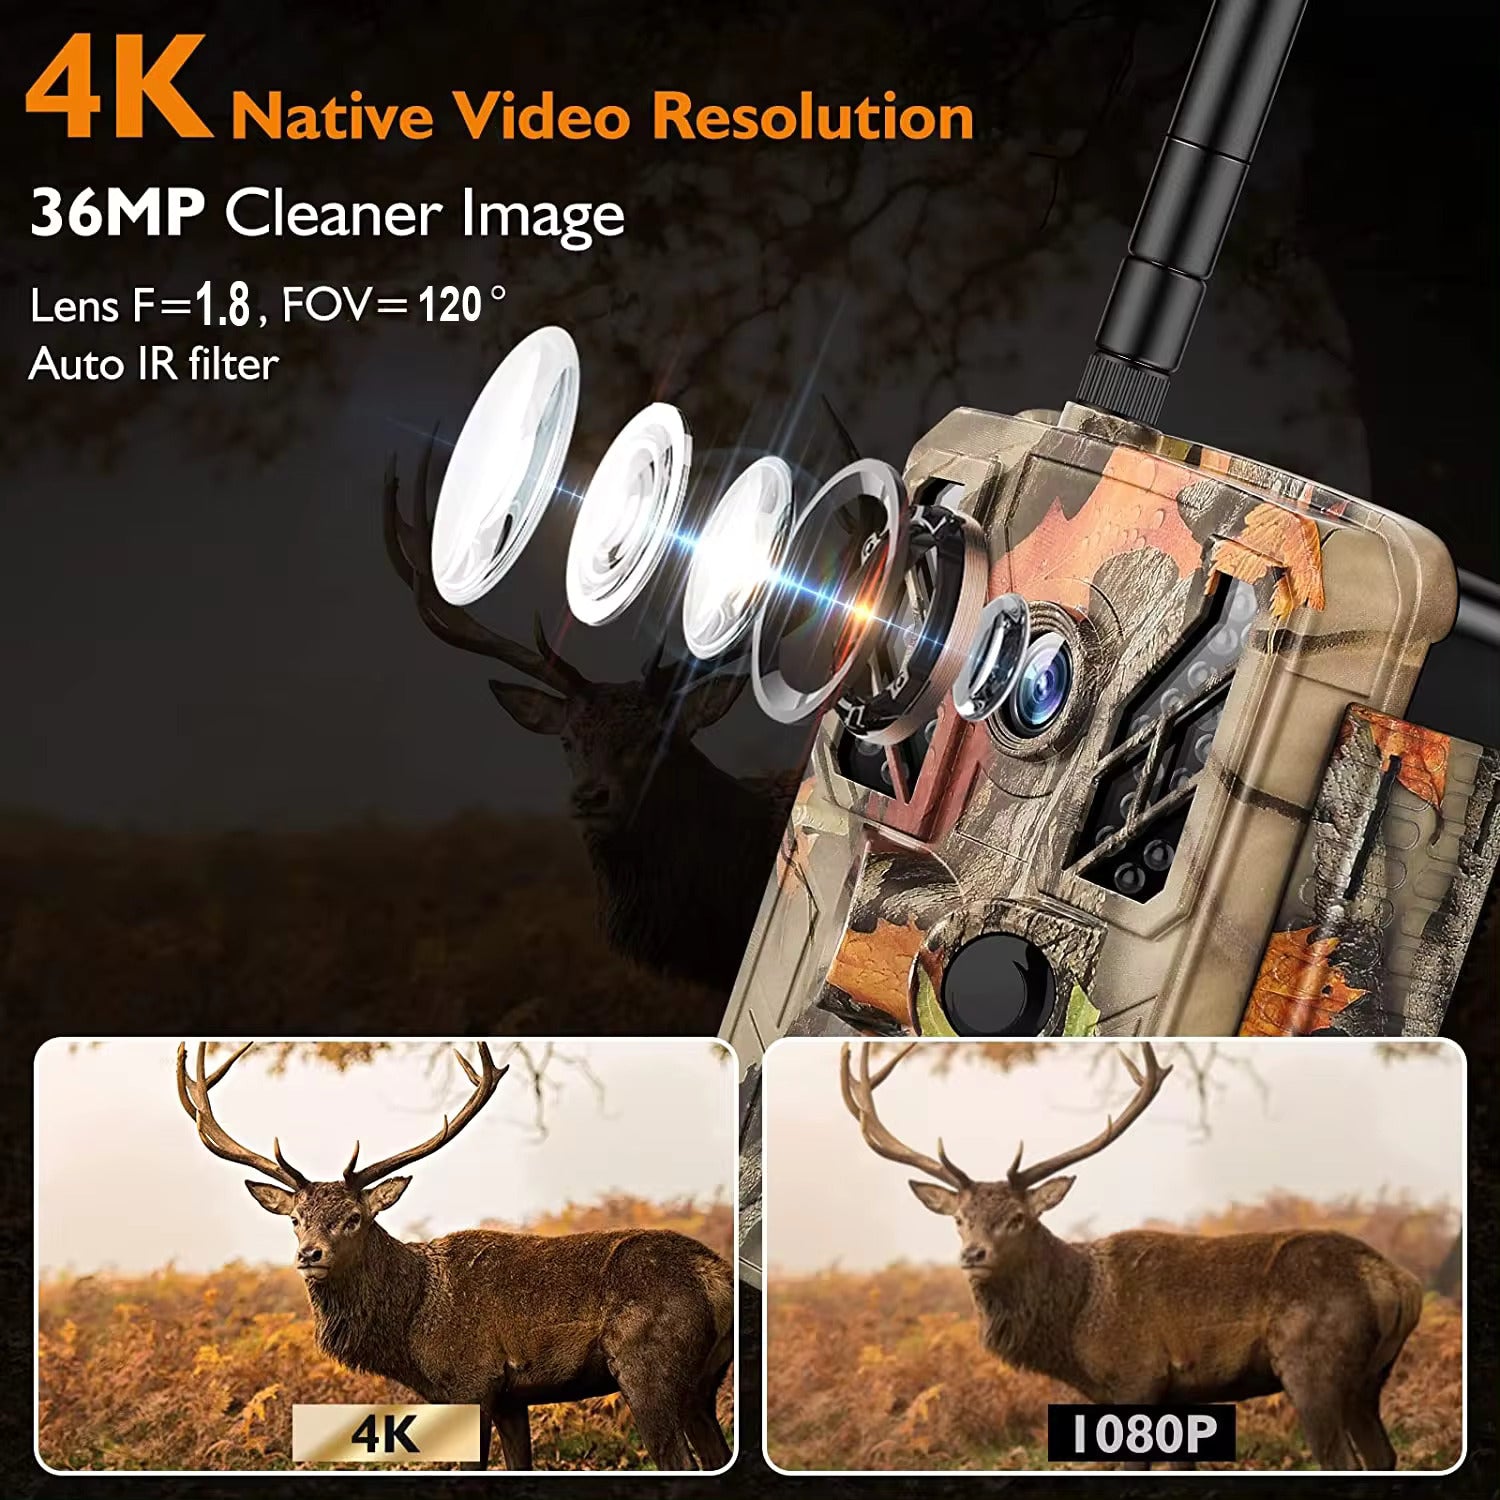 Capture the unseen details of wildlife with this 4k wifi trail camera, boasting a 36MP resolution and full HD video capabilities for the ultimate outdoor surveillance experience.